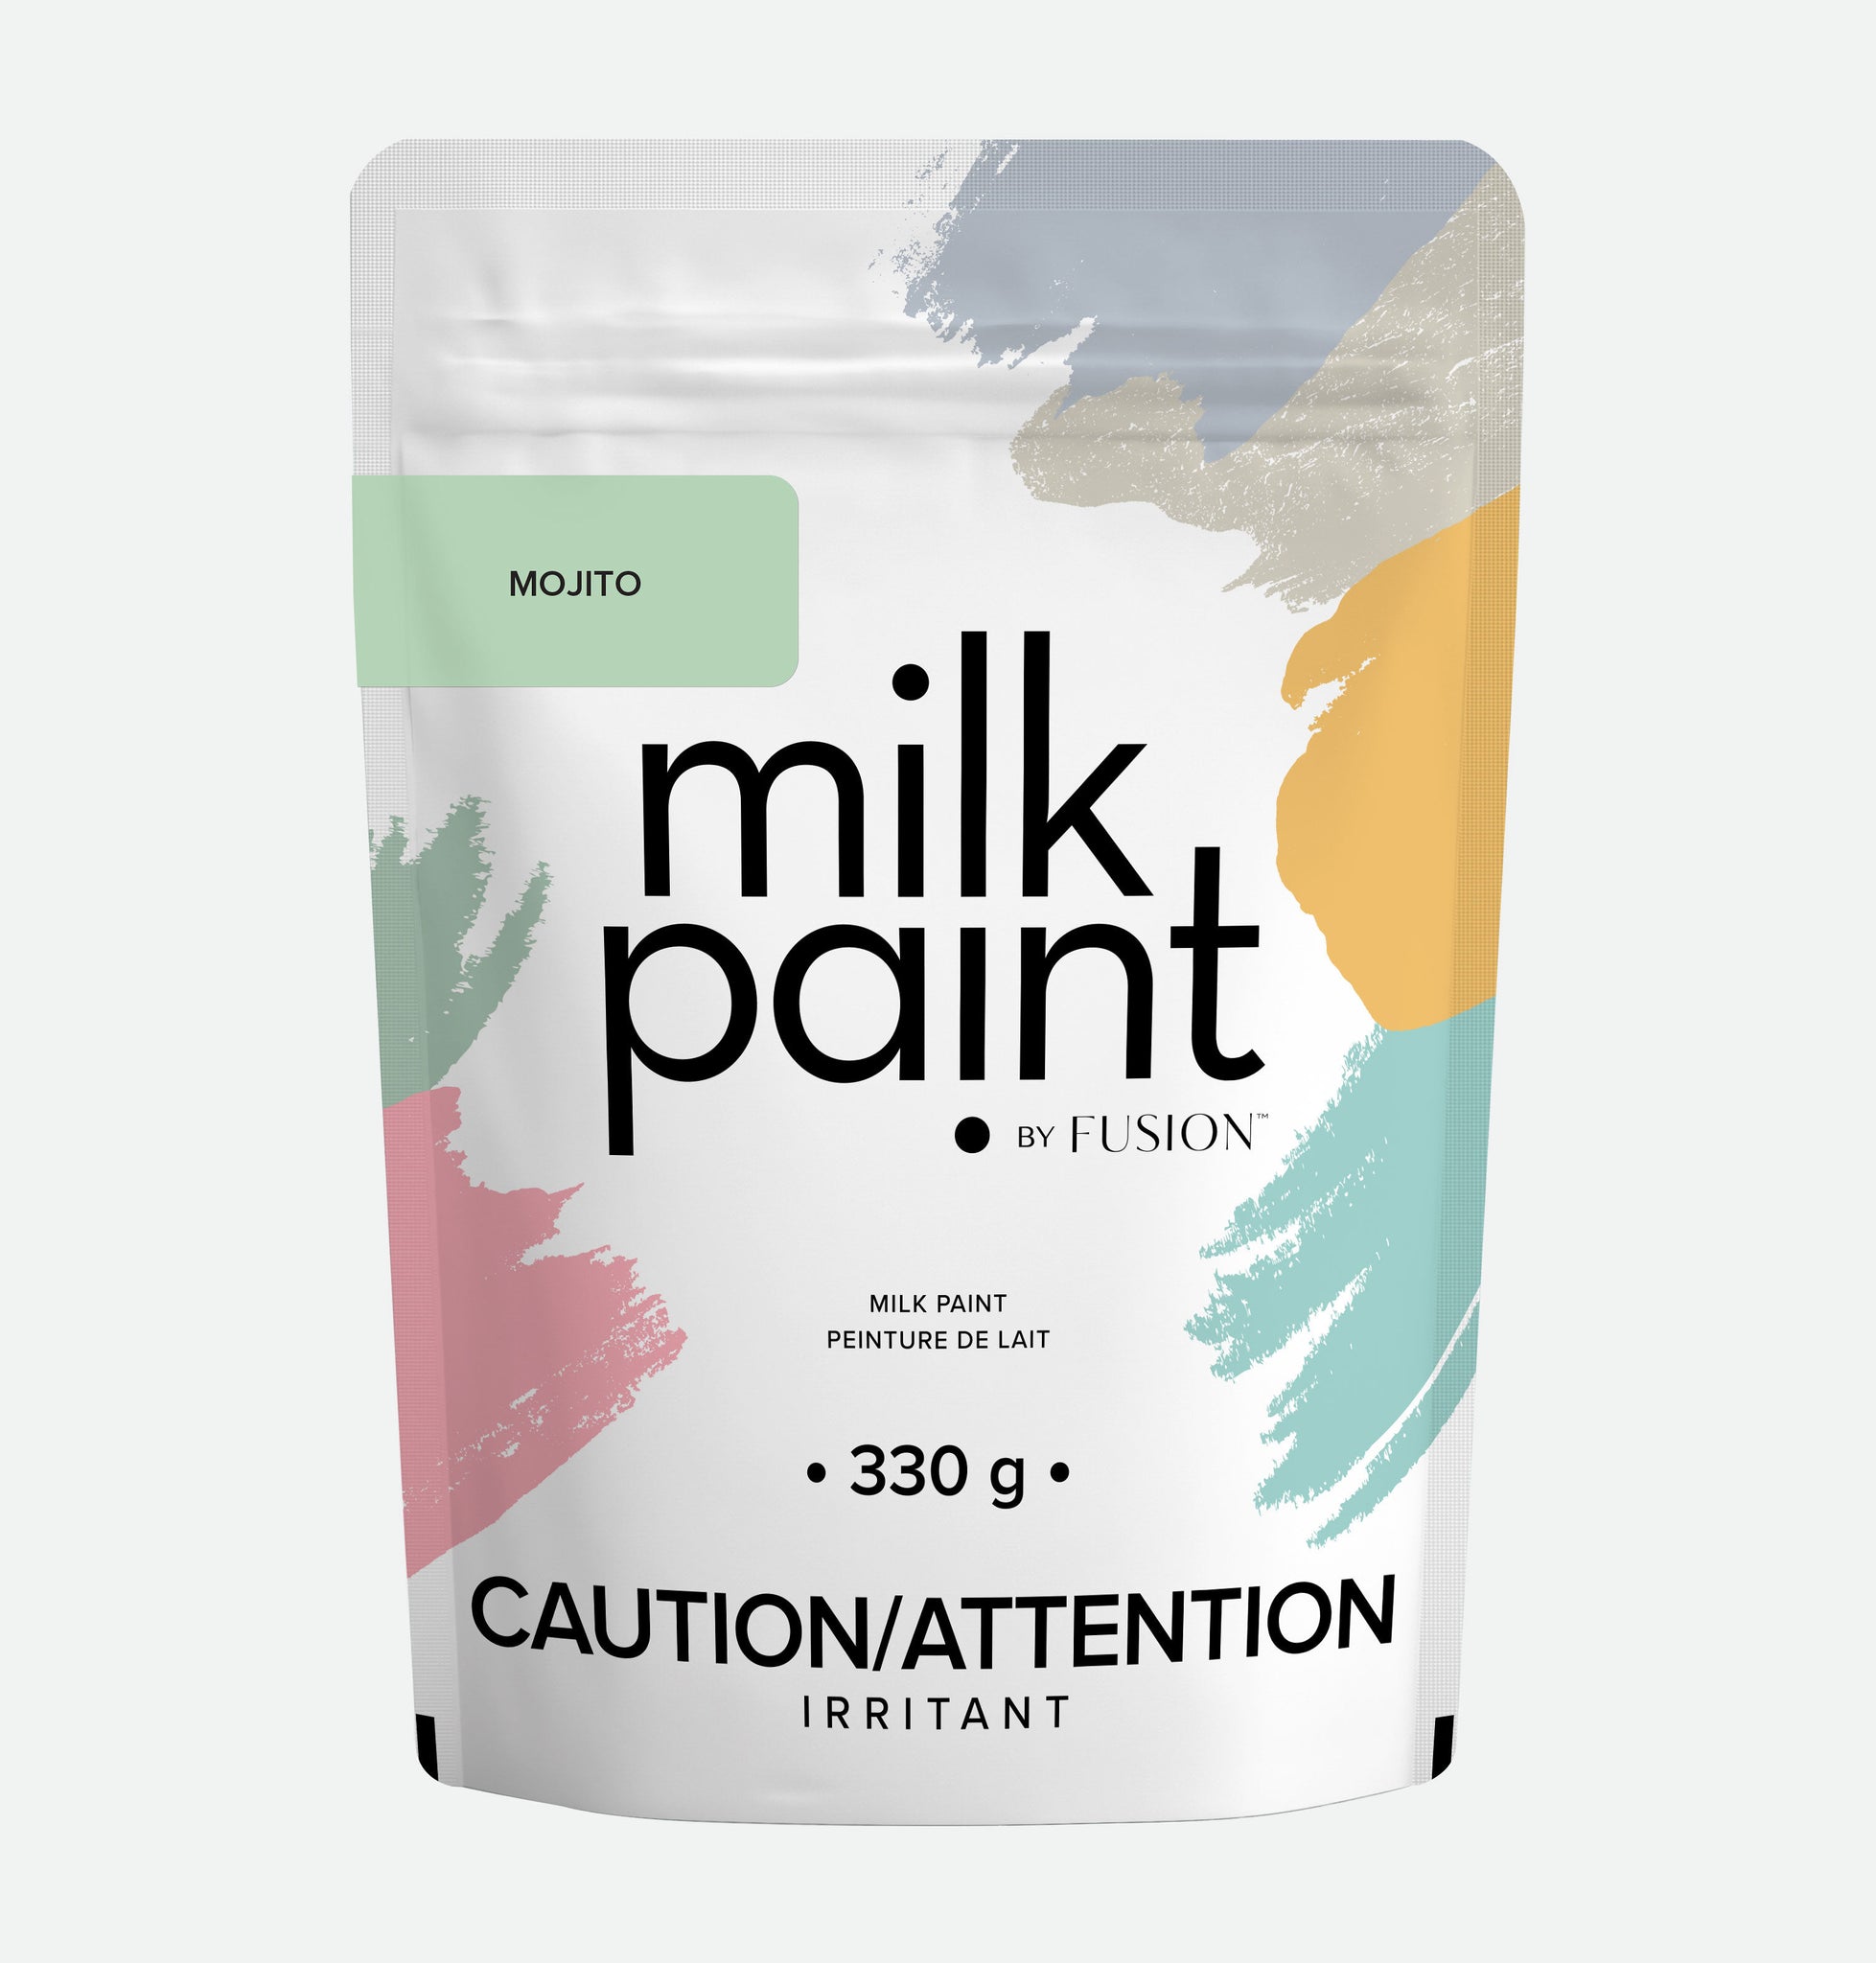 Mojito Milk Paint by Fusion @ Painted Heirloom